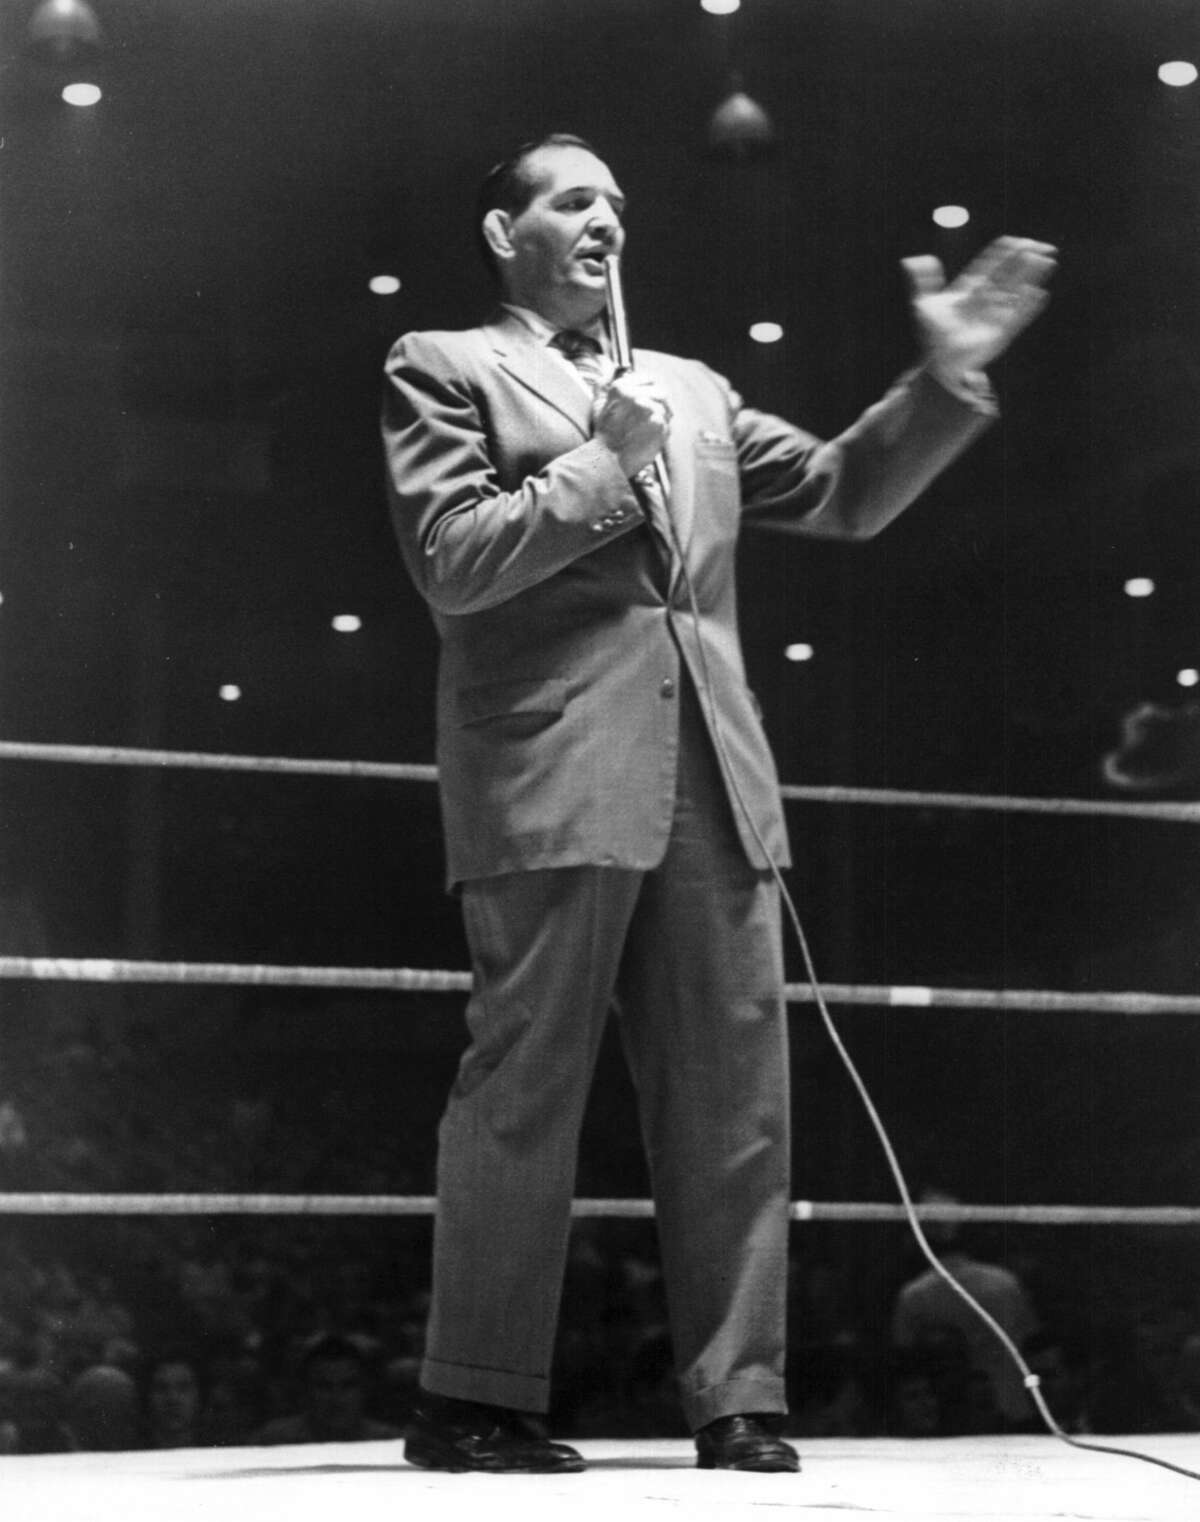 December 1961: With wrestling personality Paul Boesch making the appeal at the final matches of the season, fans gave almost $500 to The Chronicle Goodfellow program to provide new Christmas toys and candy for Houston's needy children. Both Boesch and sports promoter Morris Sigel, who sweetened the pot with his own donation of $100, are traditional Goodfellows boosters.